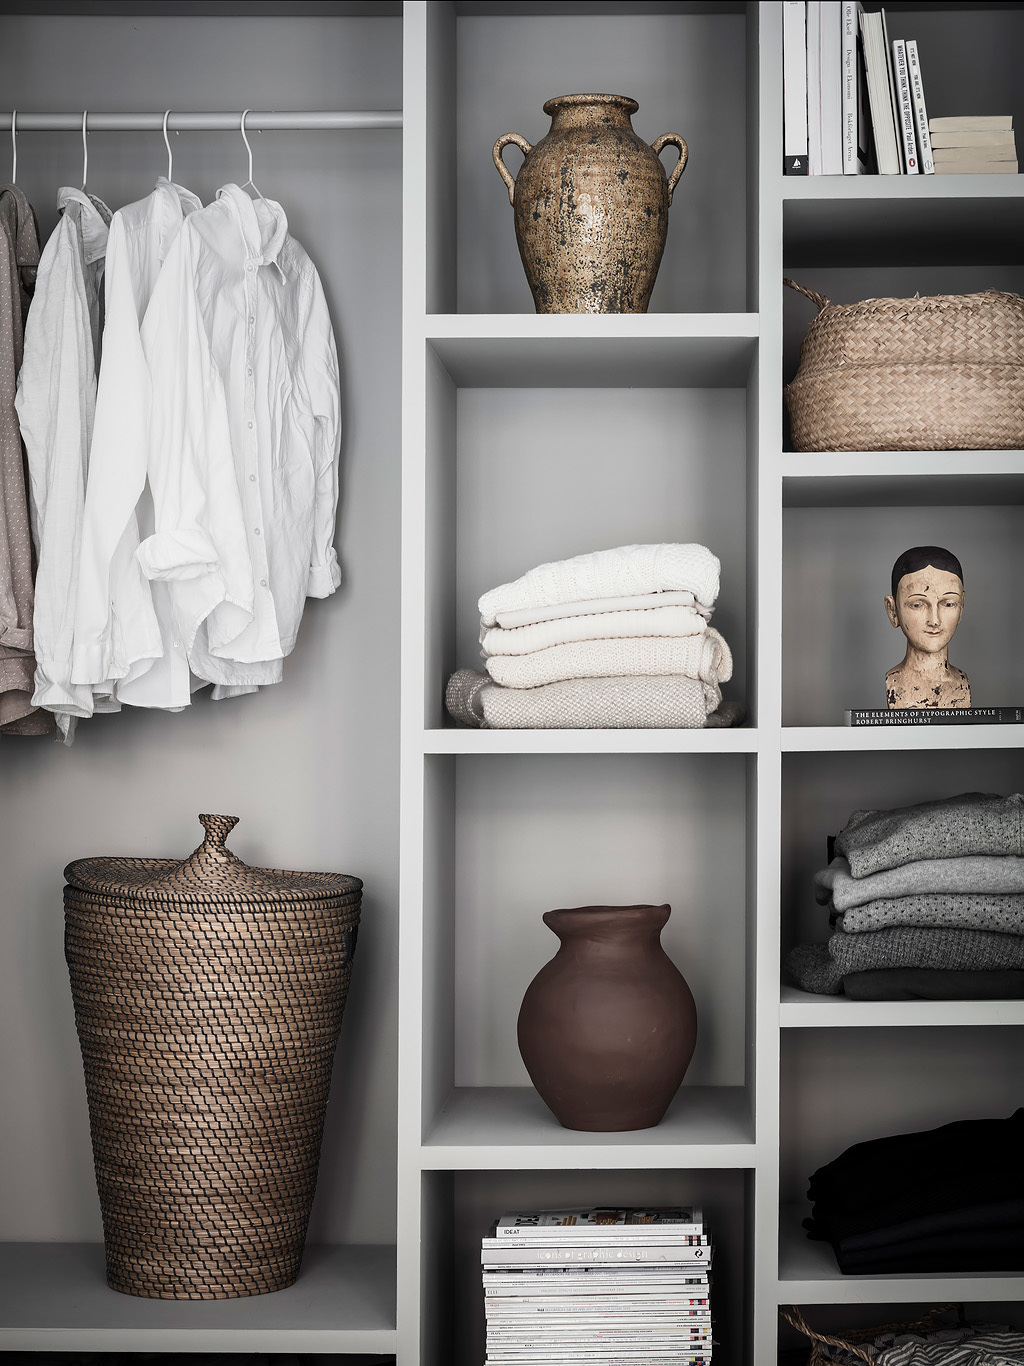 Display art among your clothing to create a lux feel.